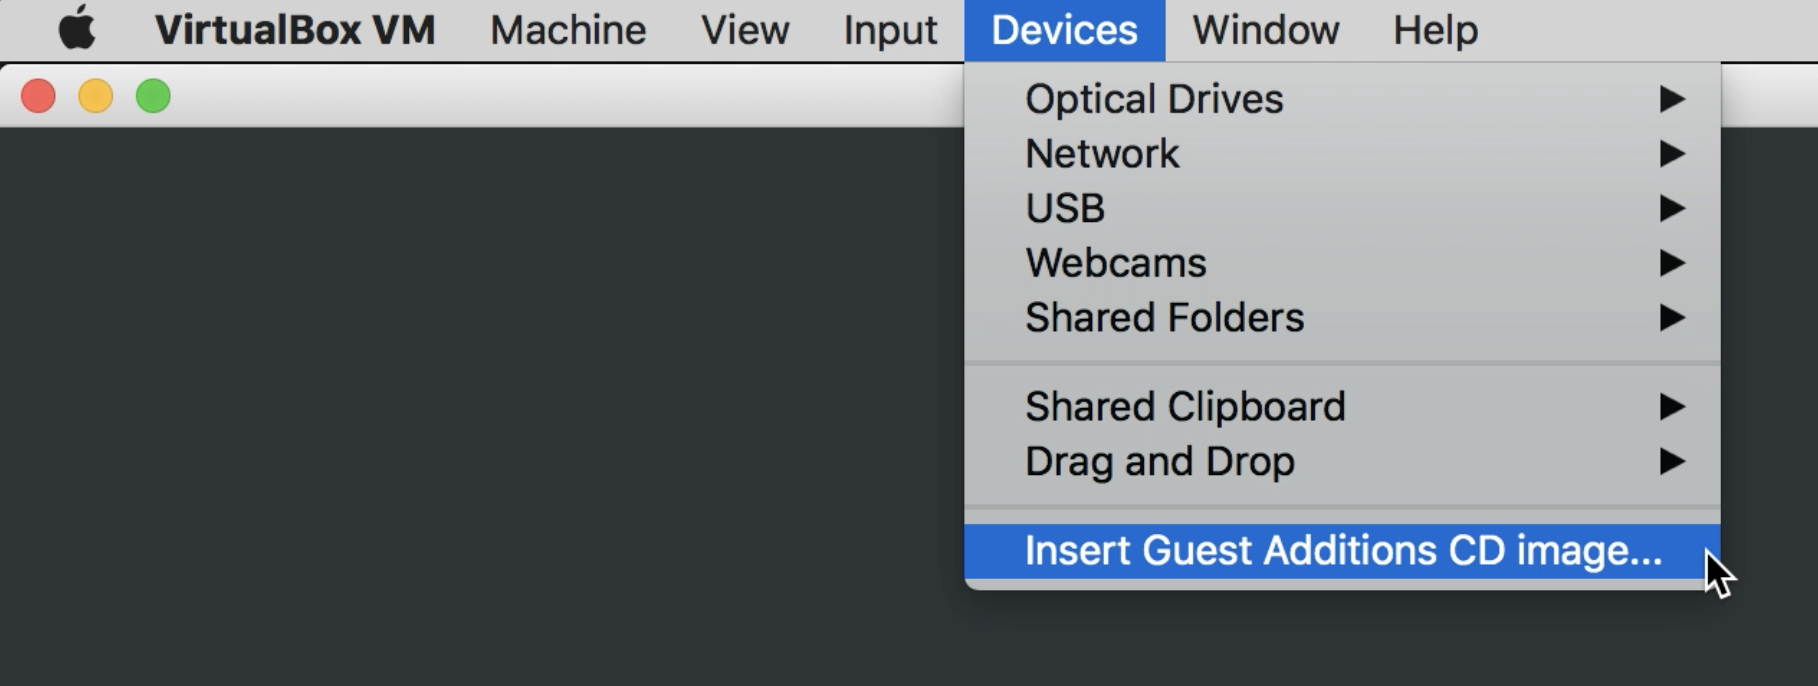 best version of virtualbox for mac guests